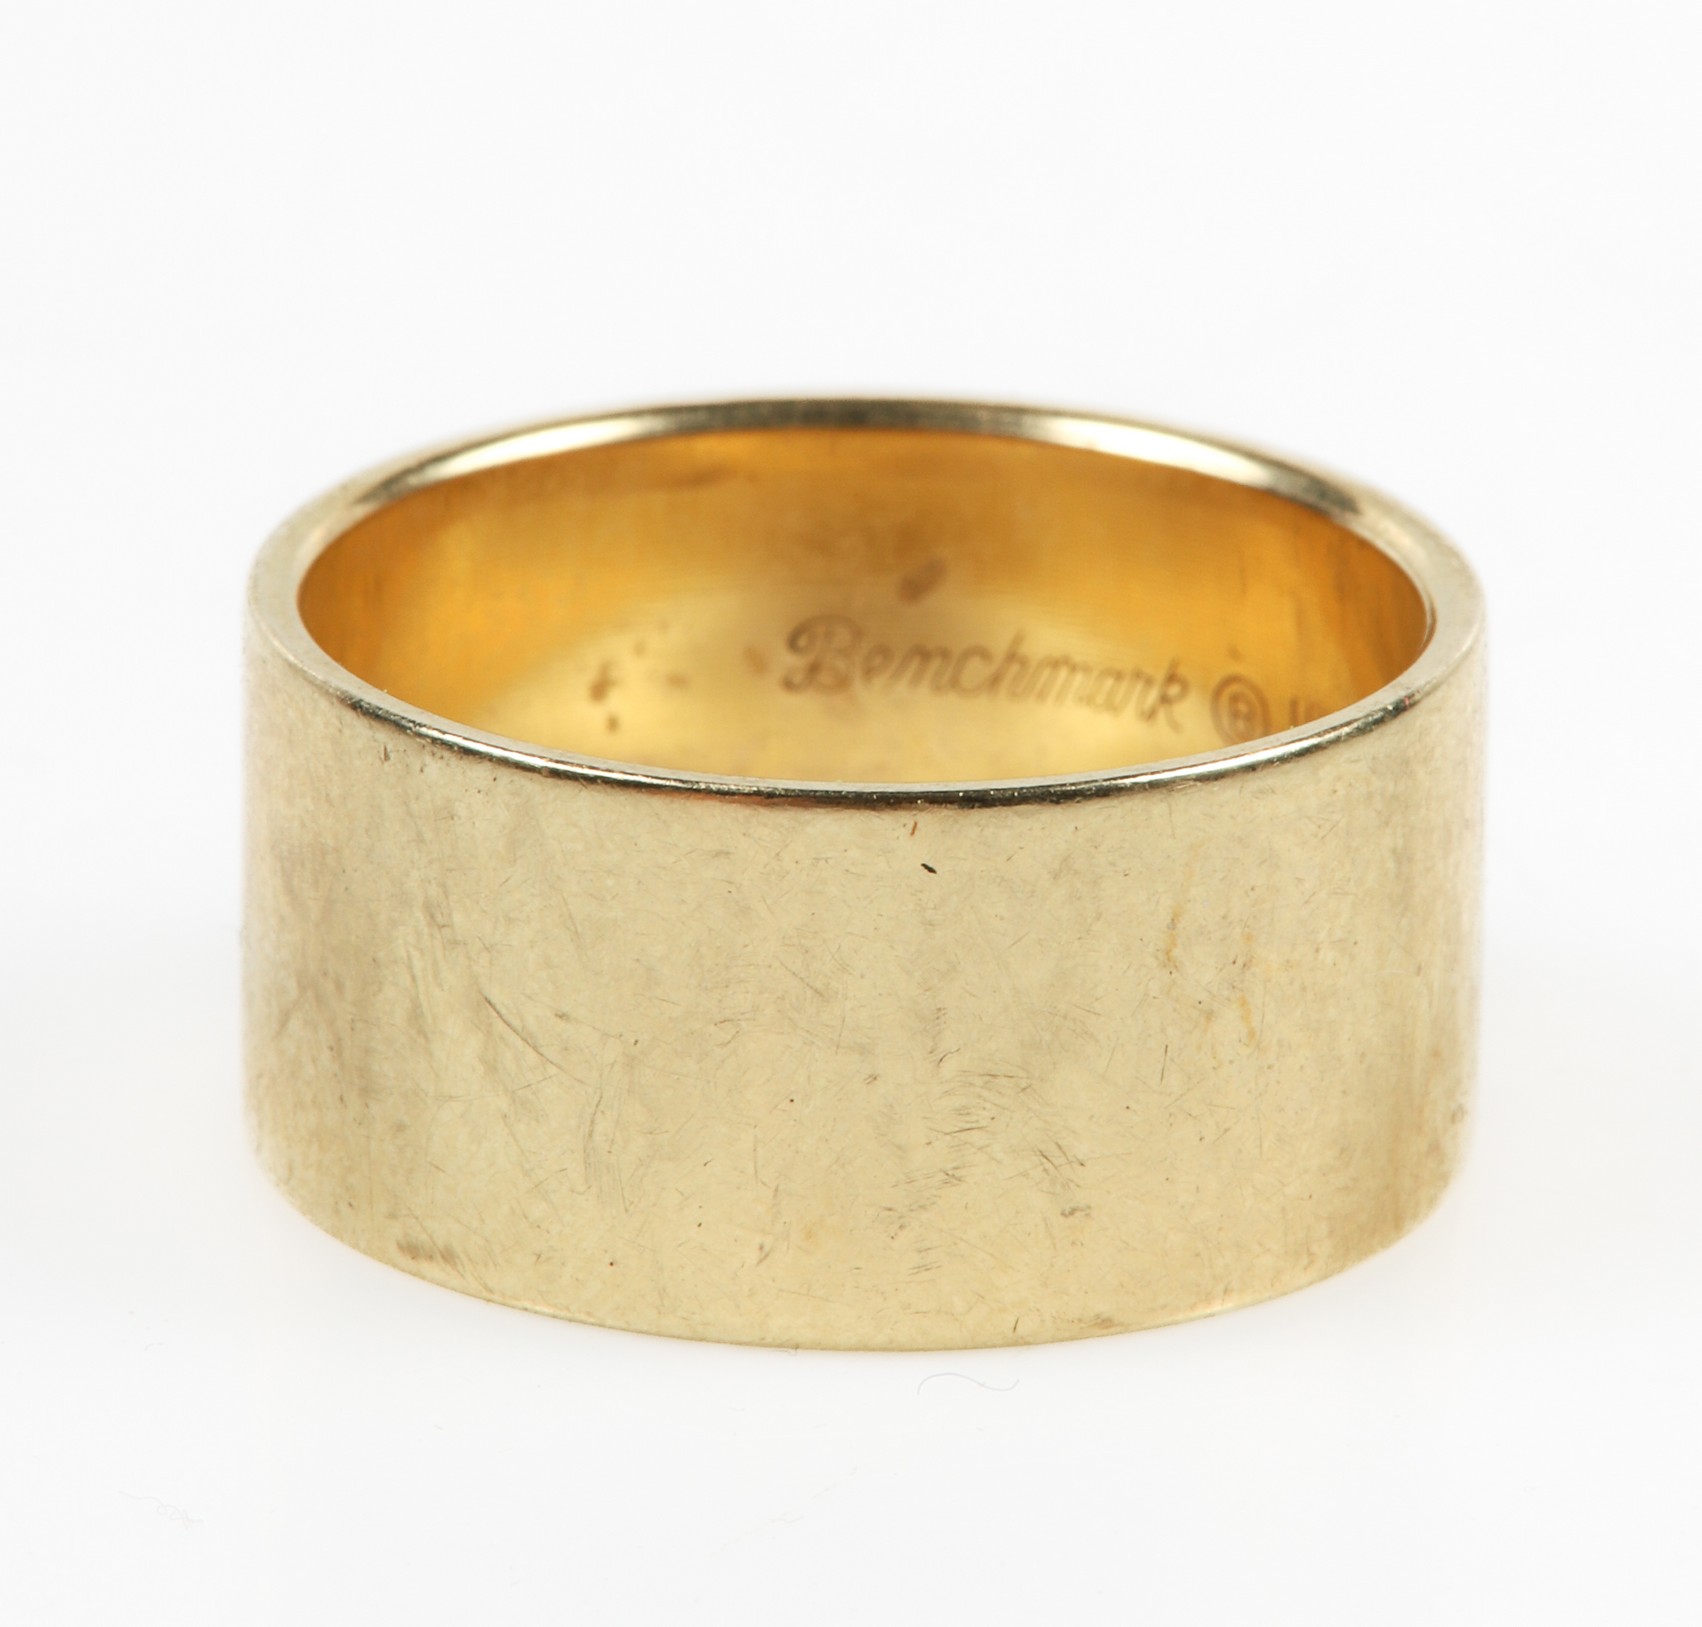 A 14K Yellow gold 9.9mm wide band